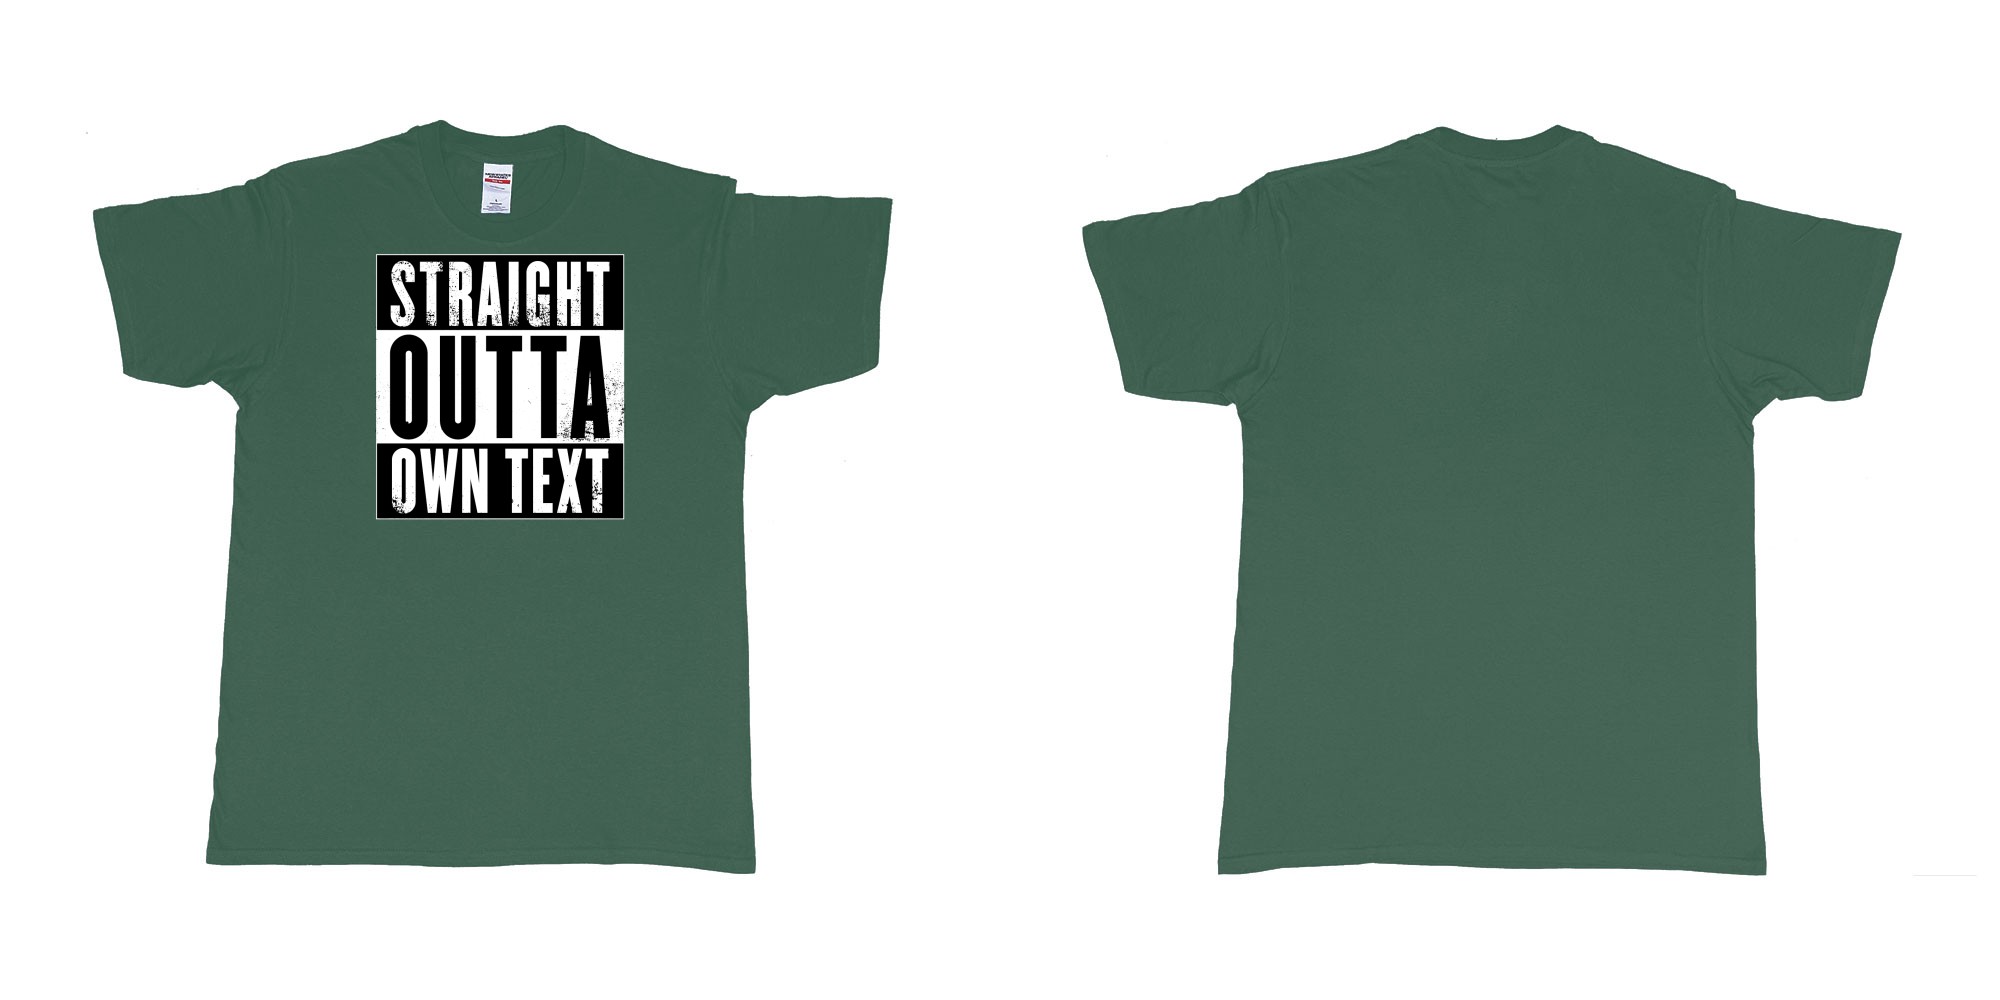 Custom tshirt design Straight Outta Compton in fabric color forest-green choice your own text made in Bali by The Pirate Way